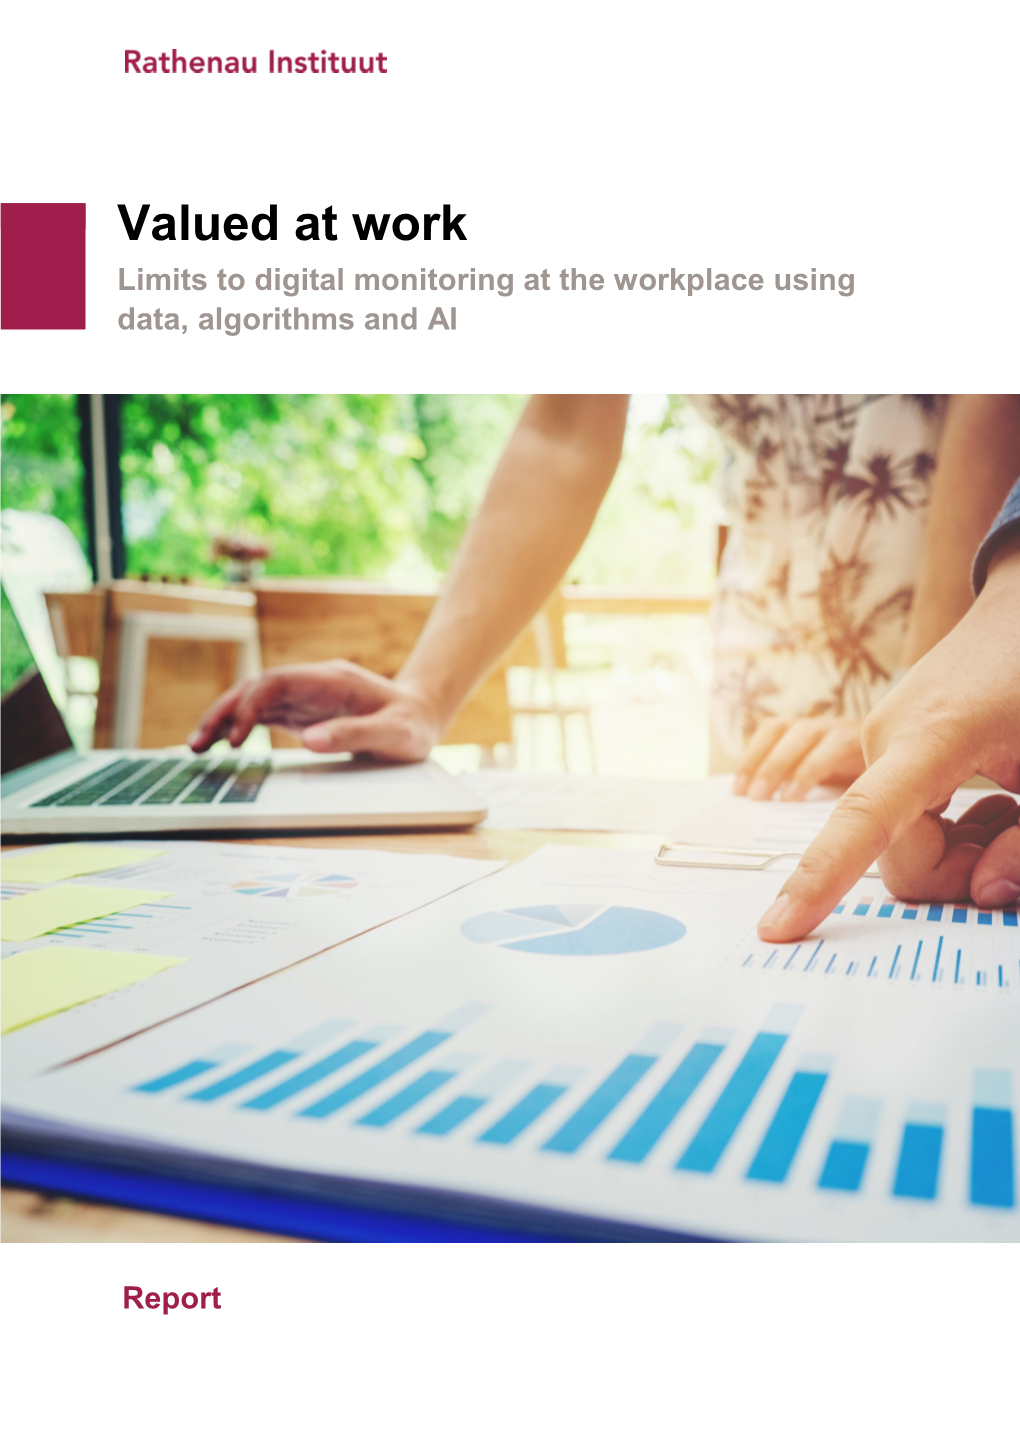 Valued at Work Limits to Digital Monitoring at the Workplace Using Data, Algorithms and AI